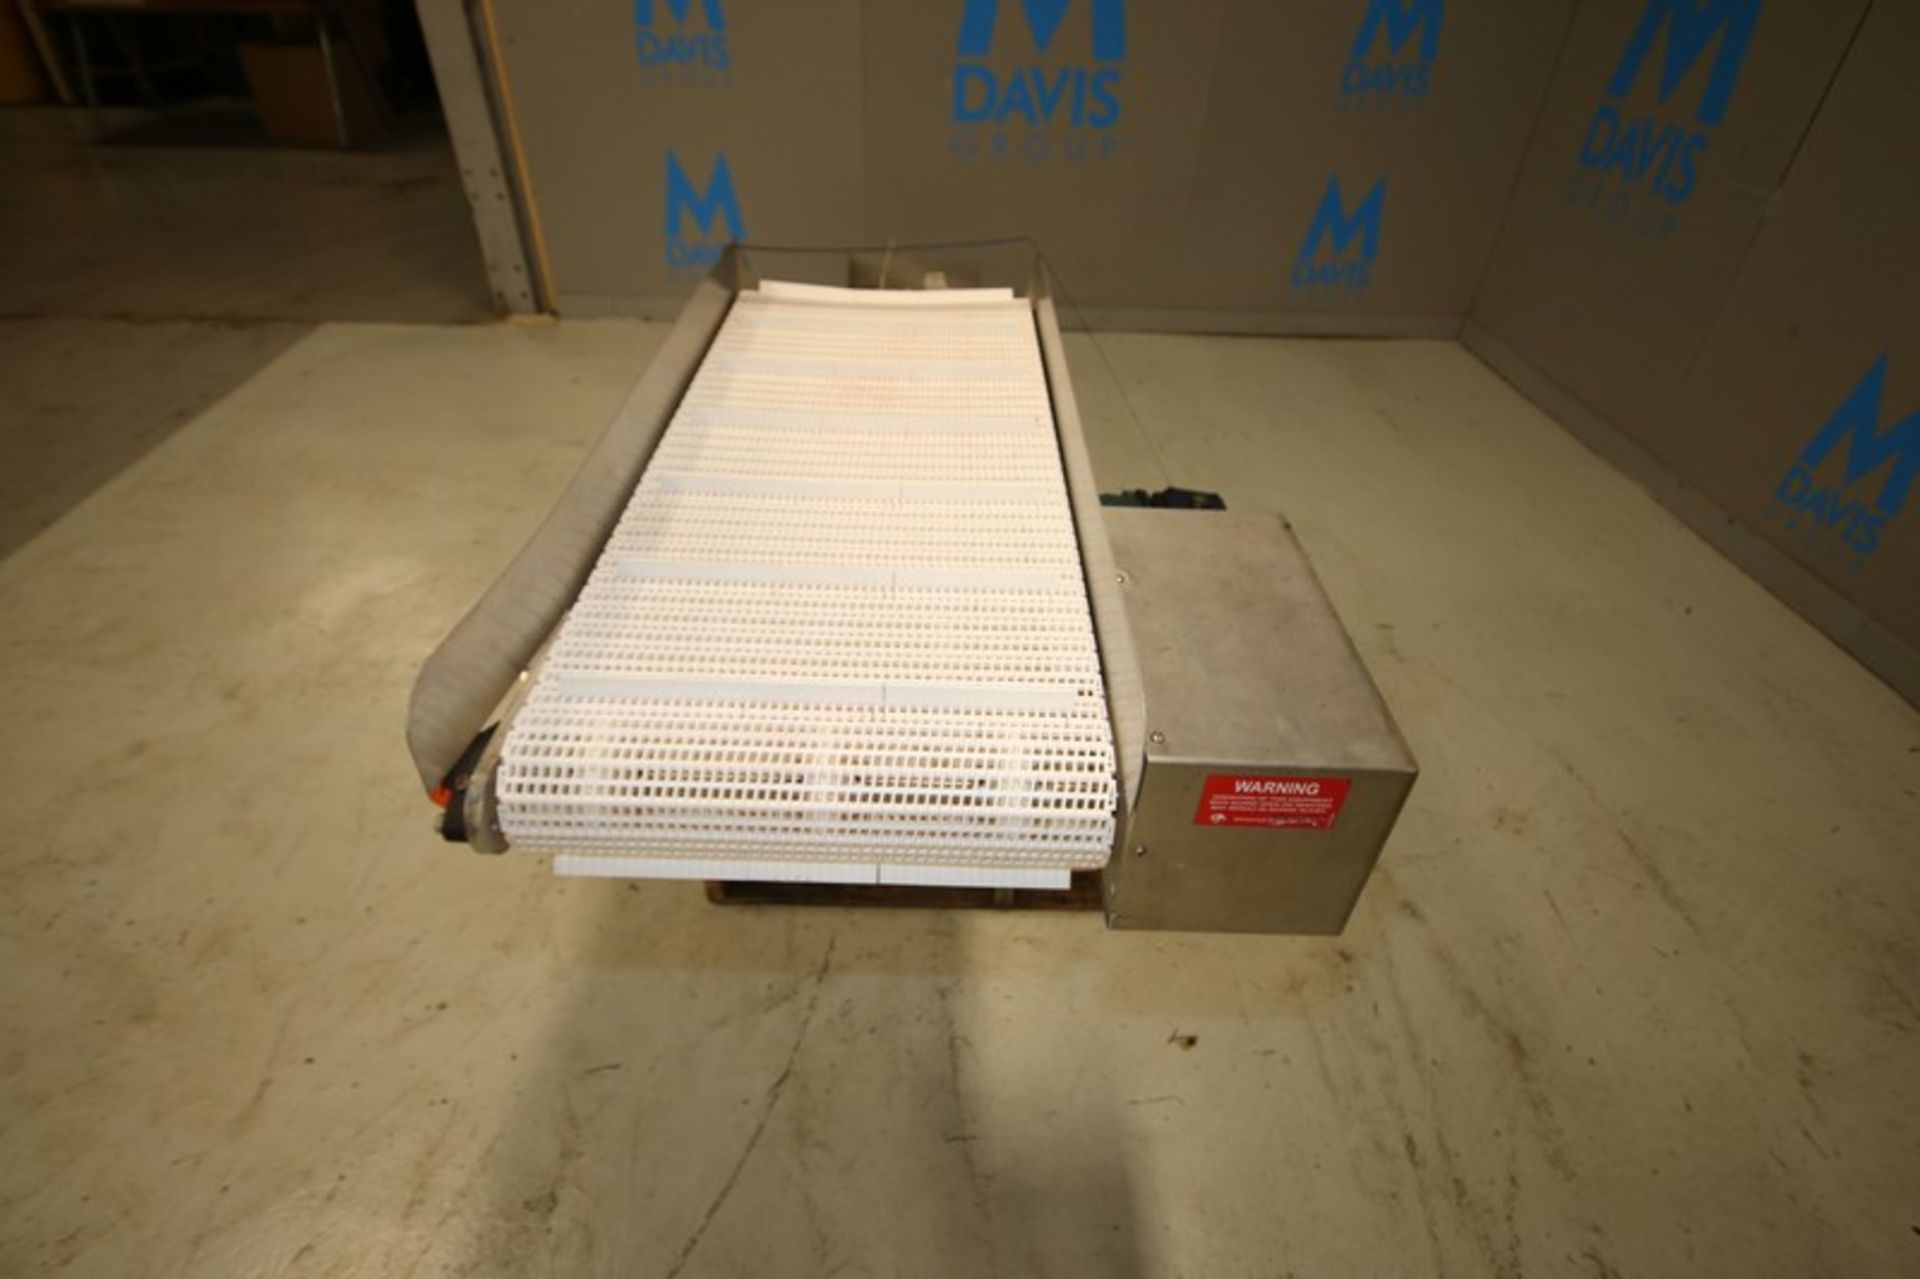 Universal Packaging Inc Aprox 9' L x 30" H x 18" W S/S Inclined Conveyor, Model TC.18.72 M, SN 1736, - Image 4 of 6